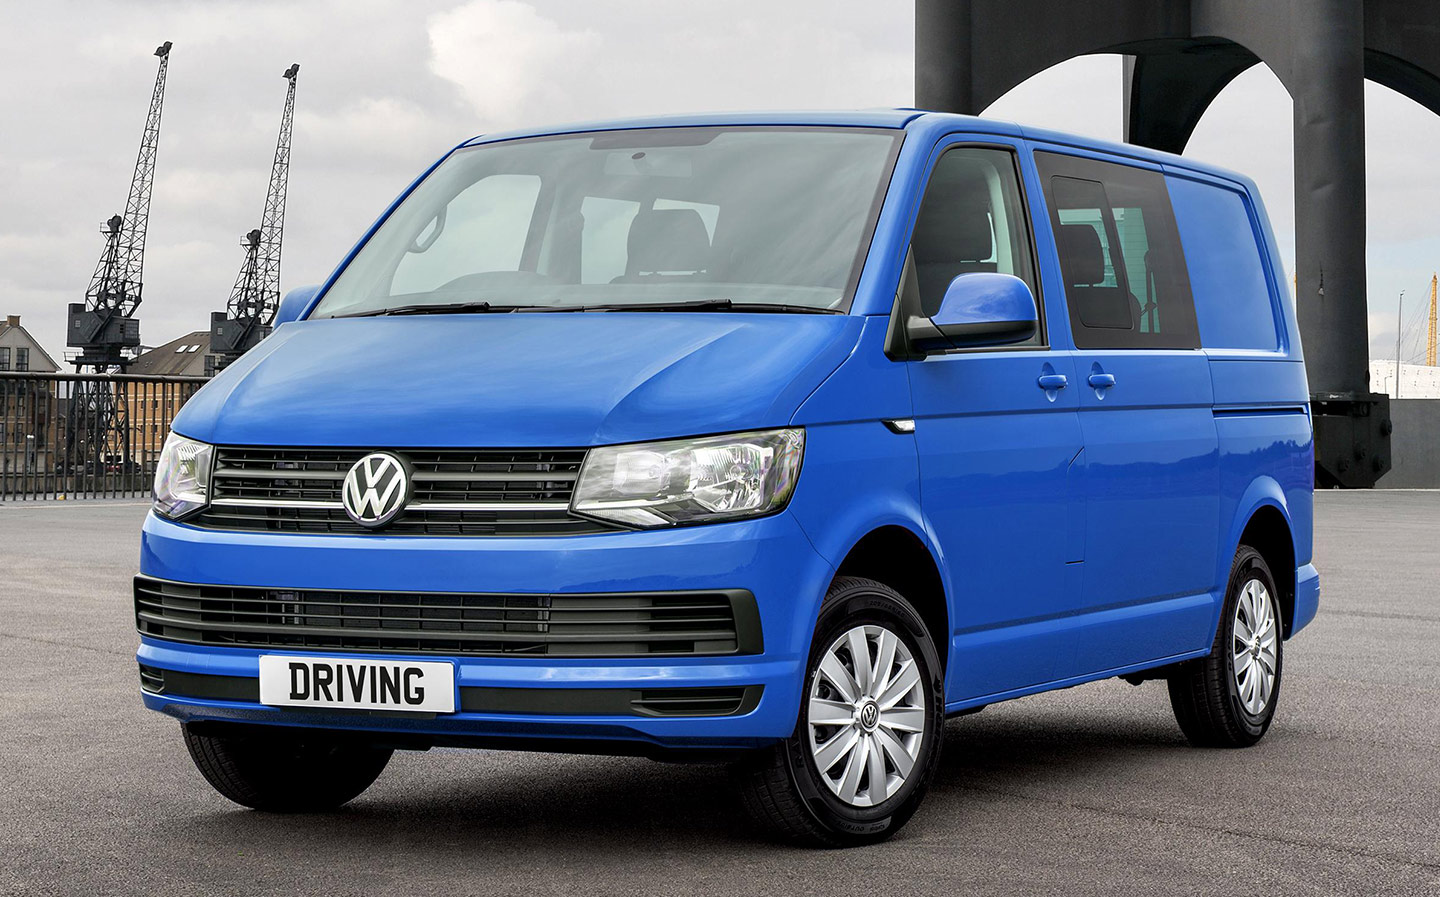 VW Transporter Kombi review by Nick Rufford for Sunday Times